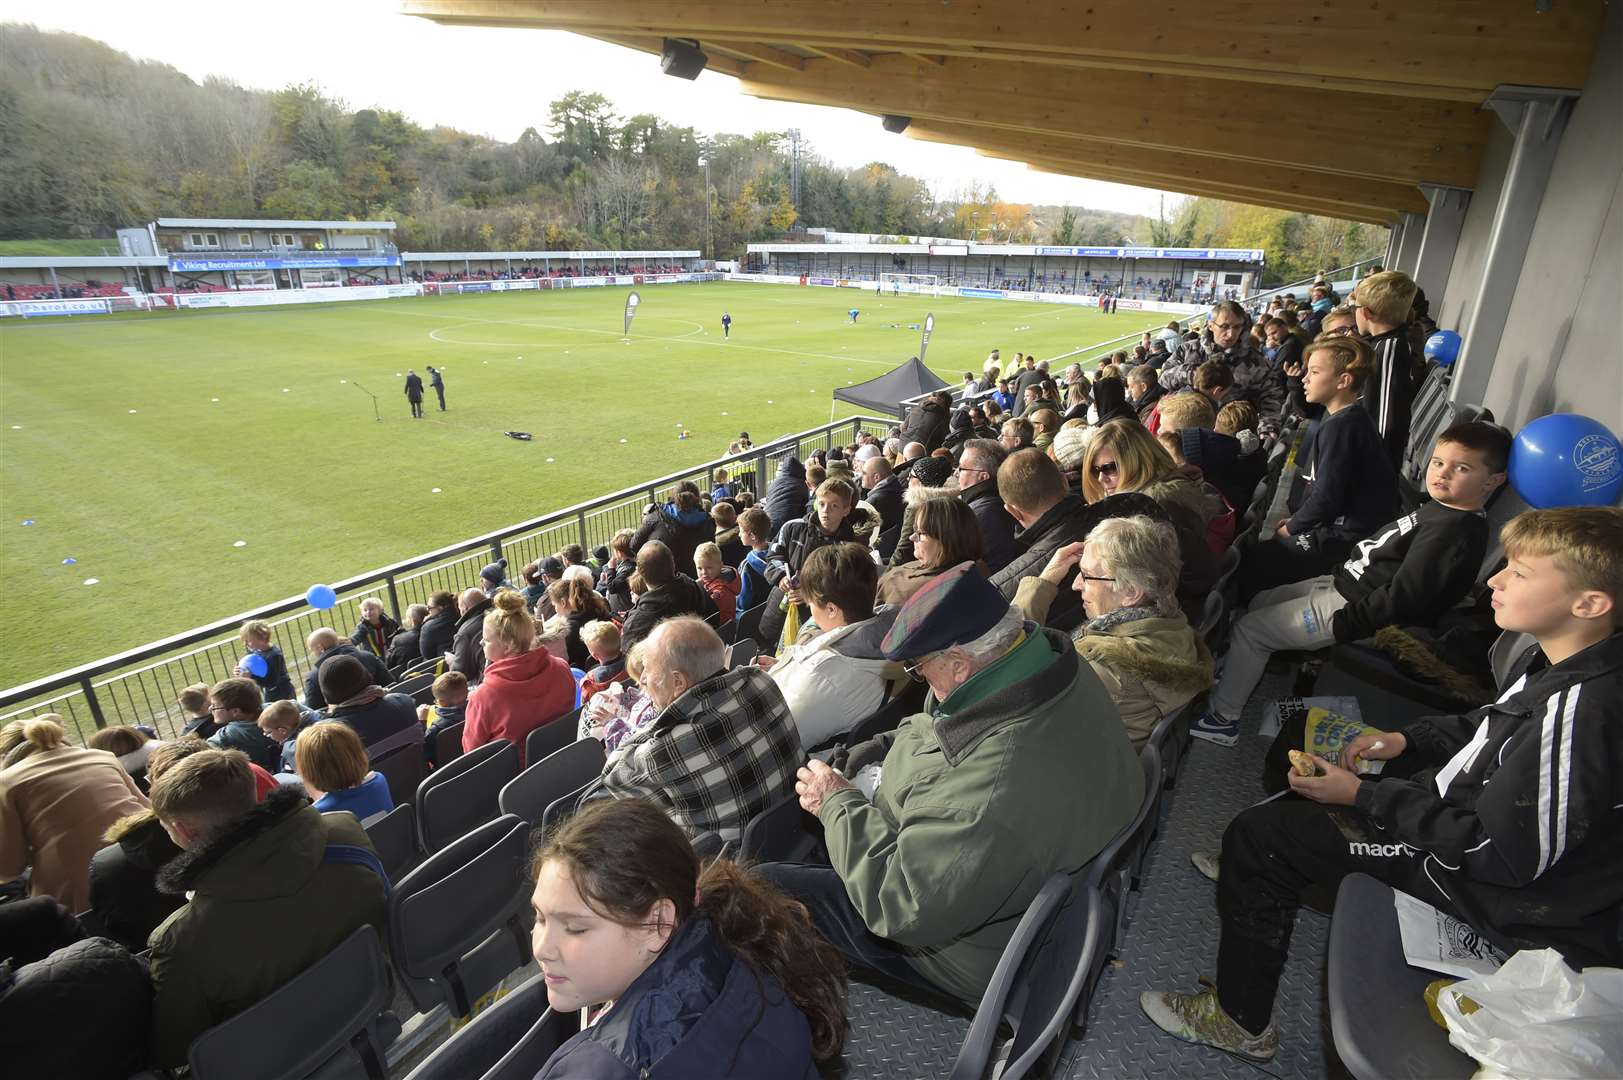 Normally bustling stands have been empty for much of the season, hitting the club's pockets hard